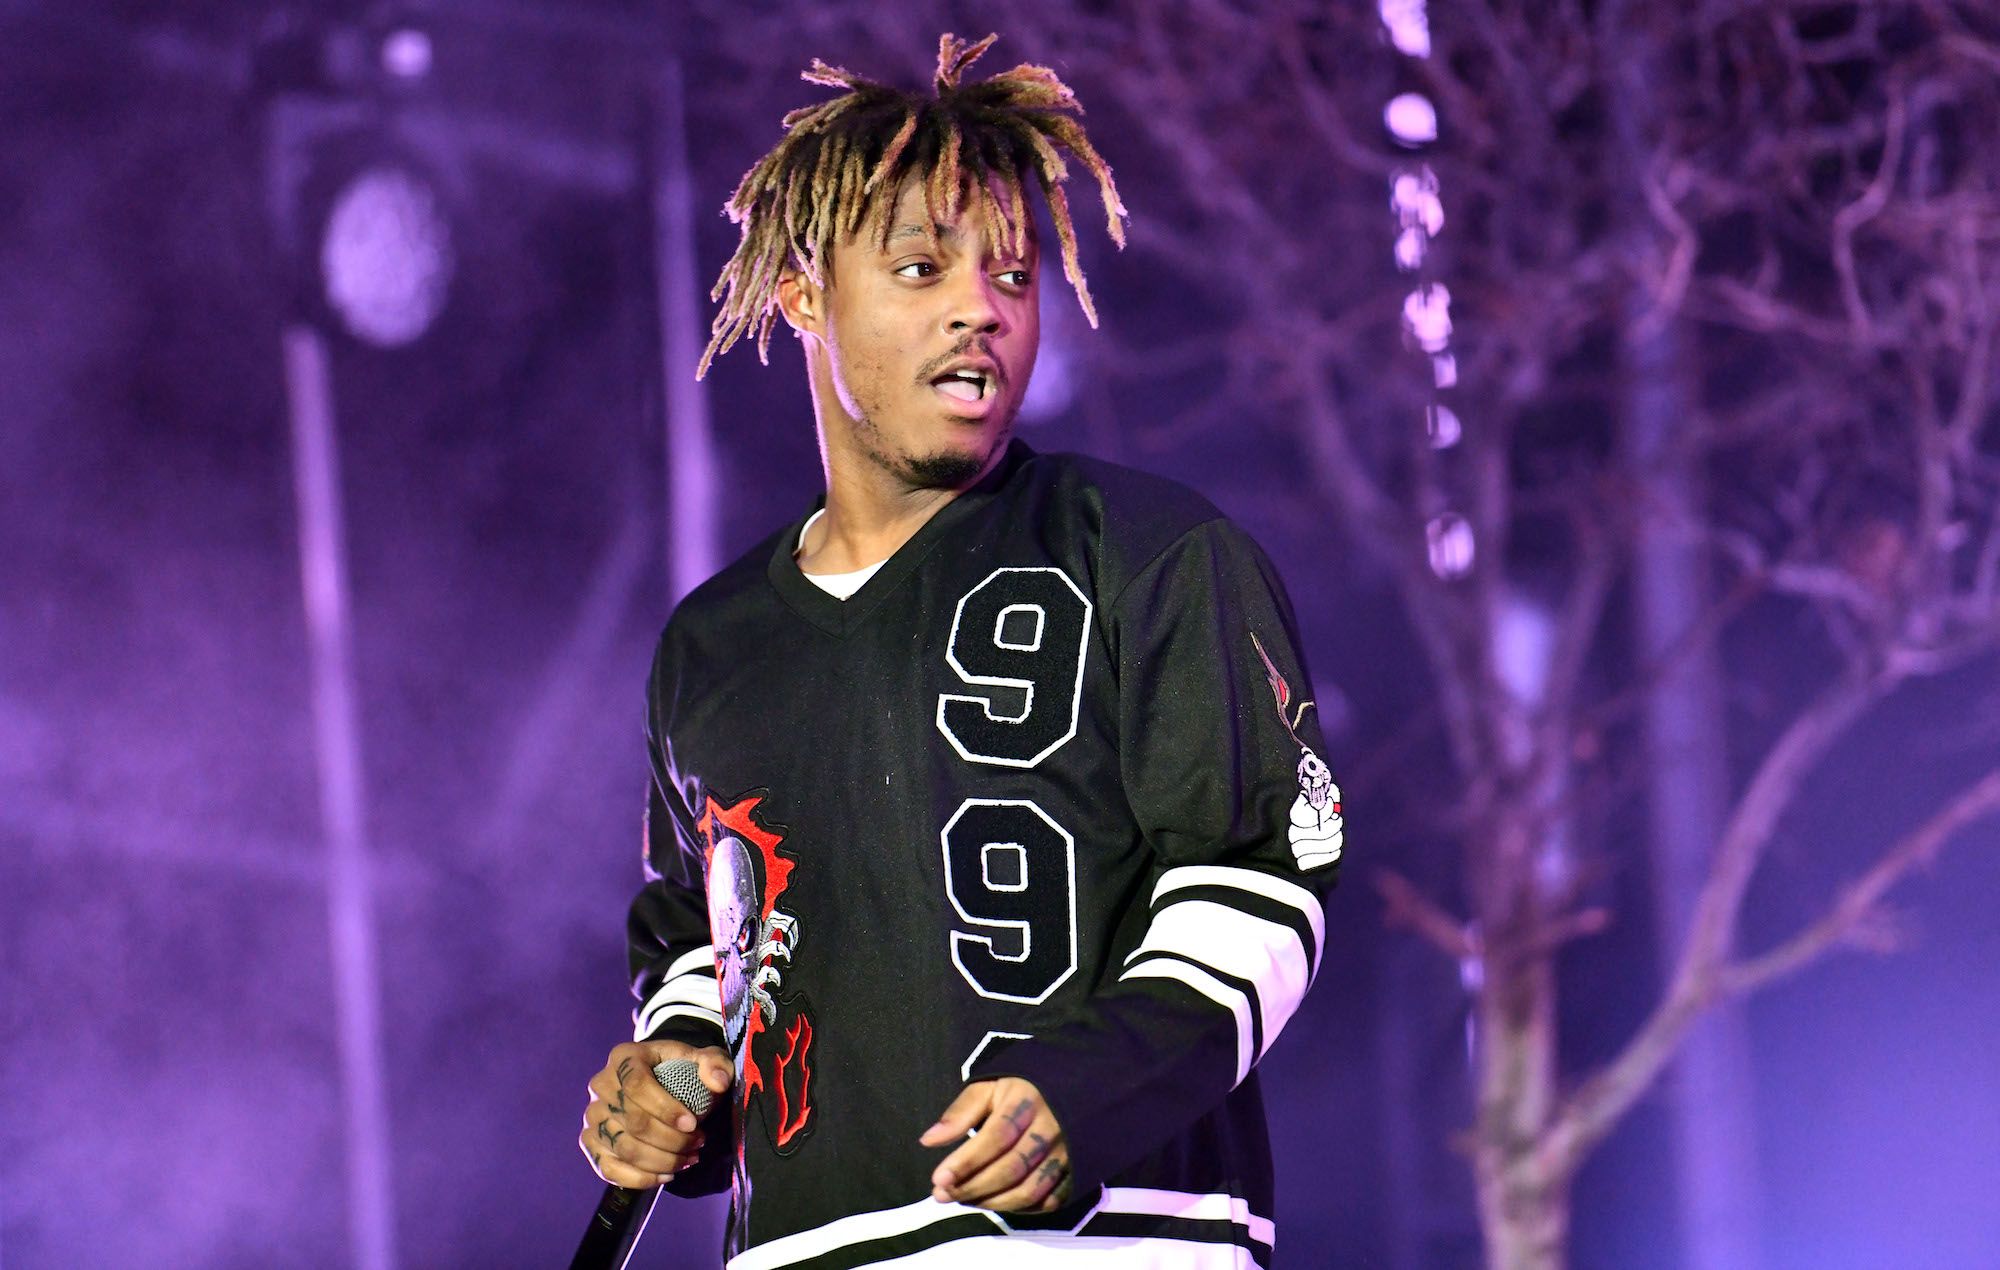 Fans left disappointed as Juice WRLD pulls out of Reading Festival